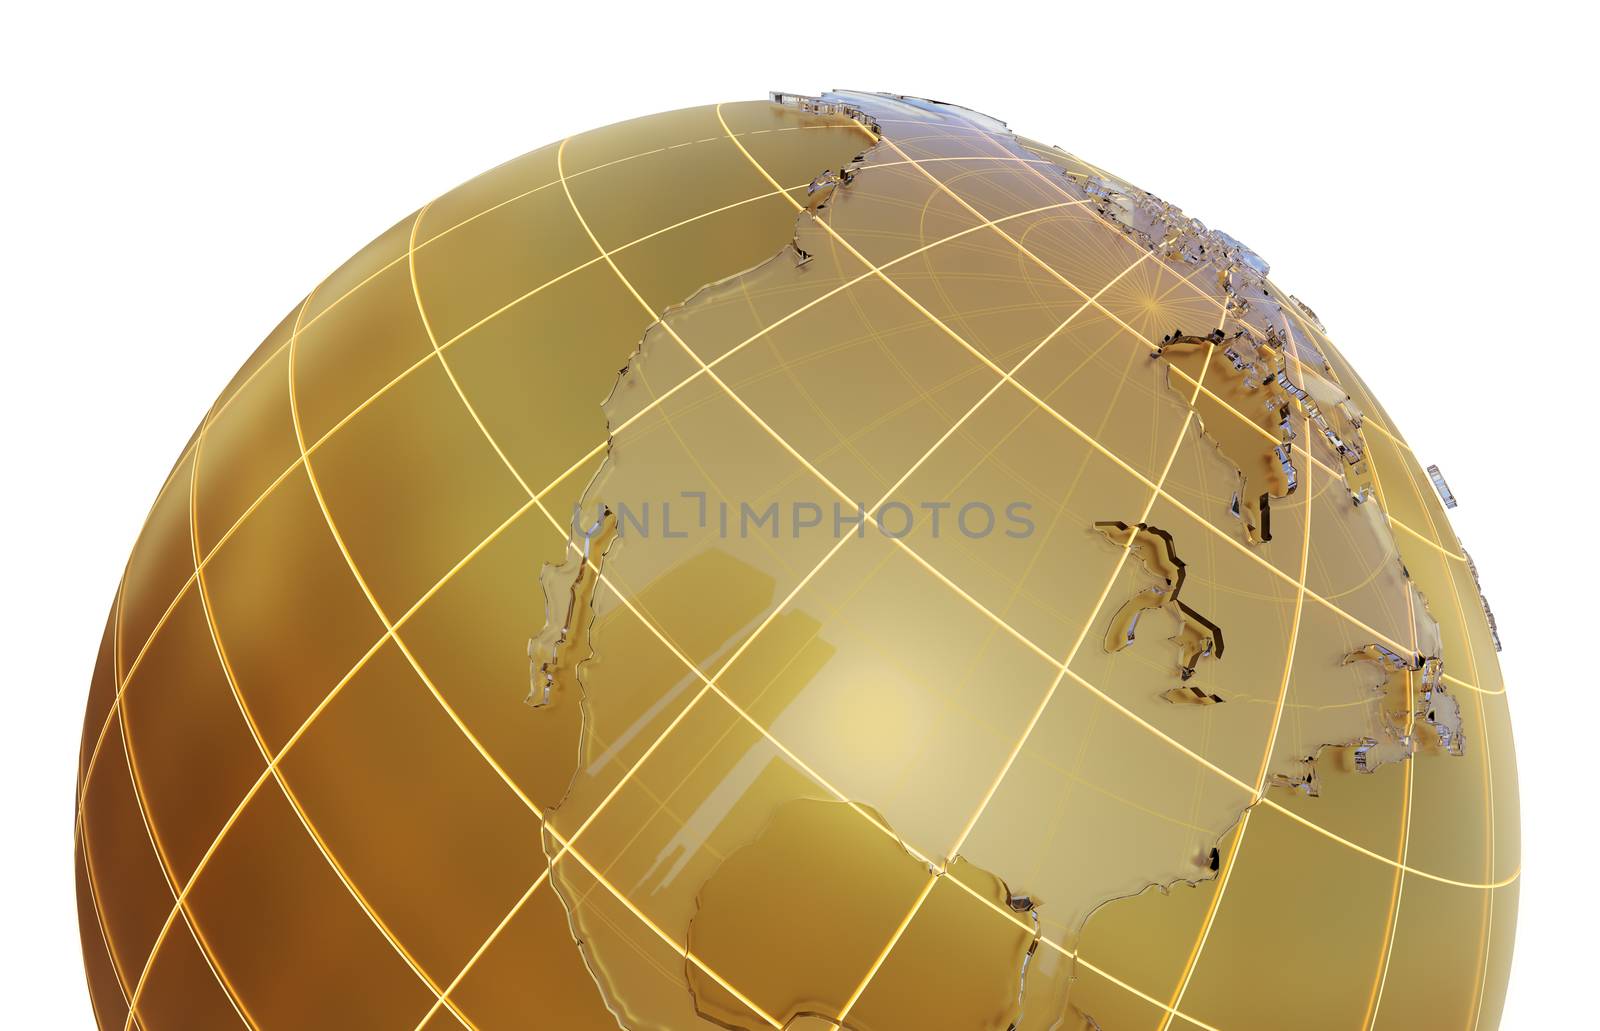 Golden globe with glass continents. 3d illustration on white background. Abstract sphere as Earth